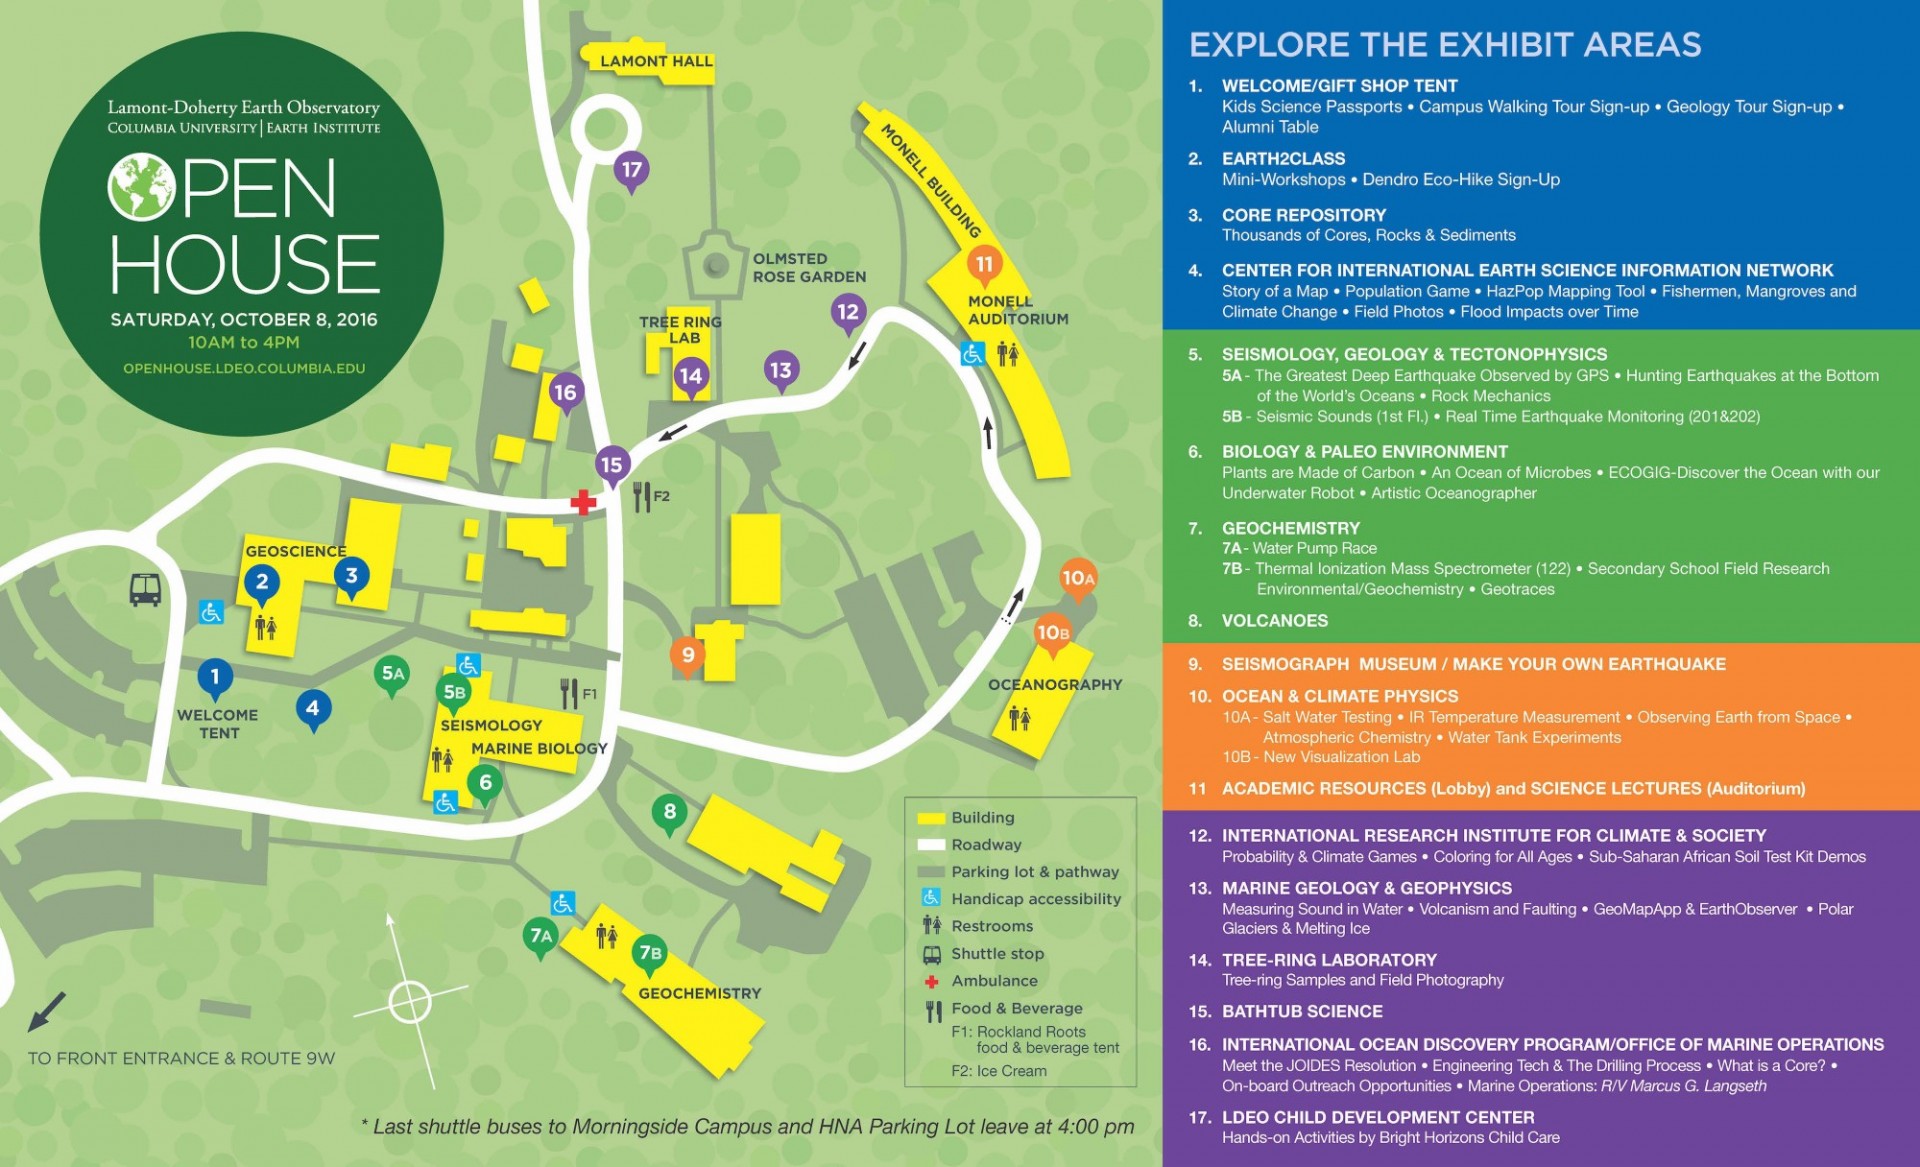 map showing location of exhibits and facilities around campus